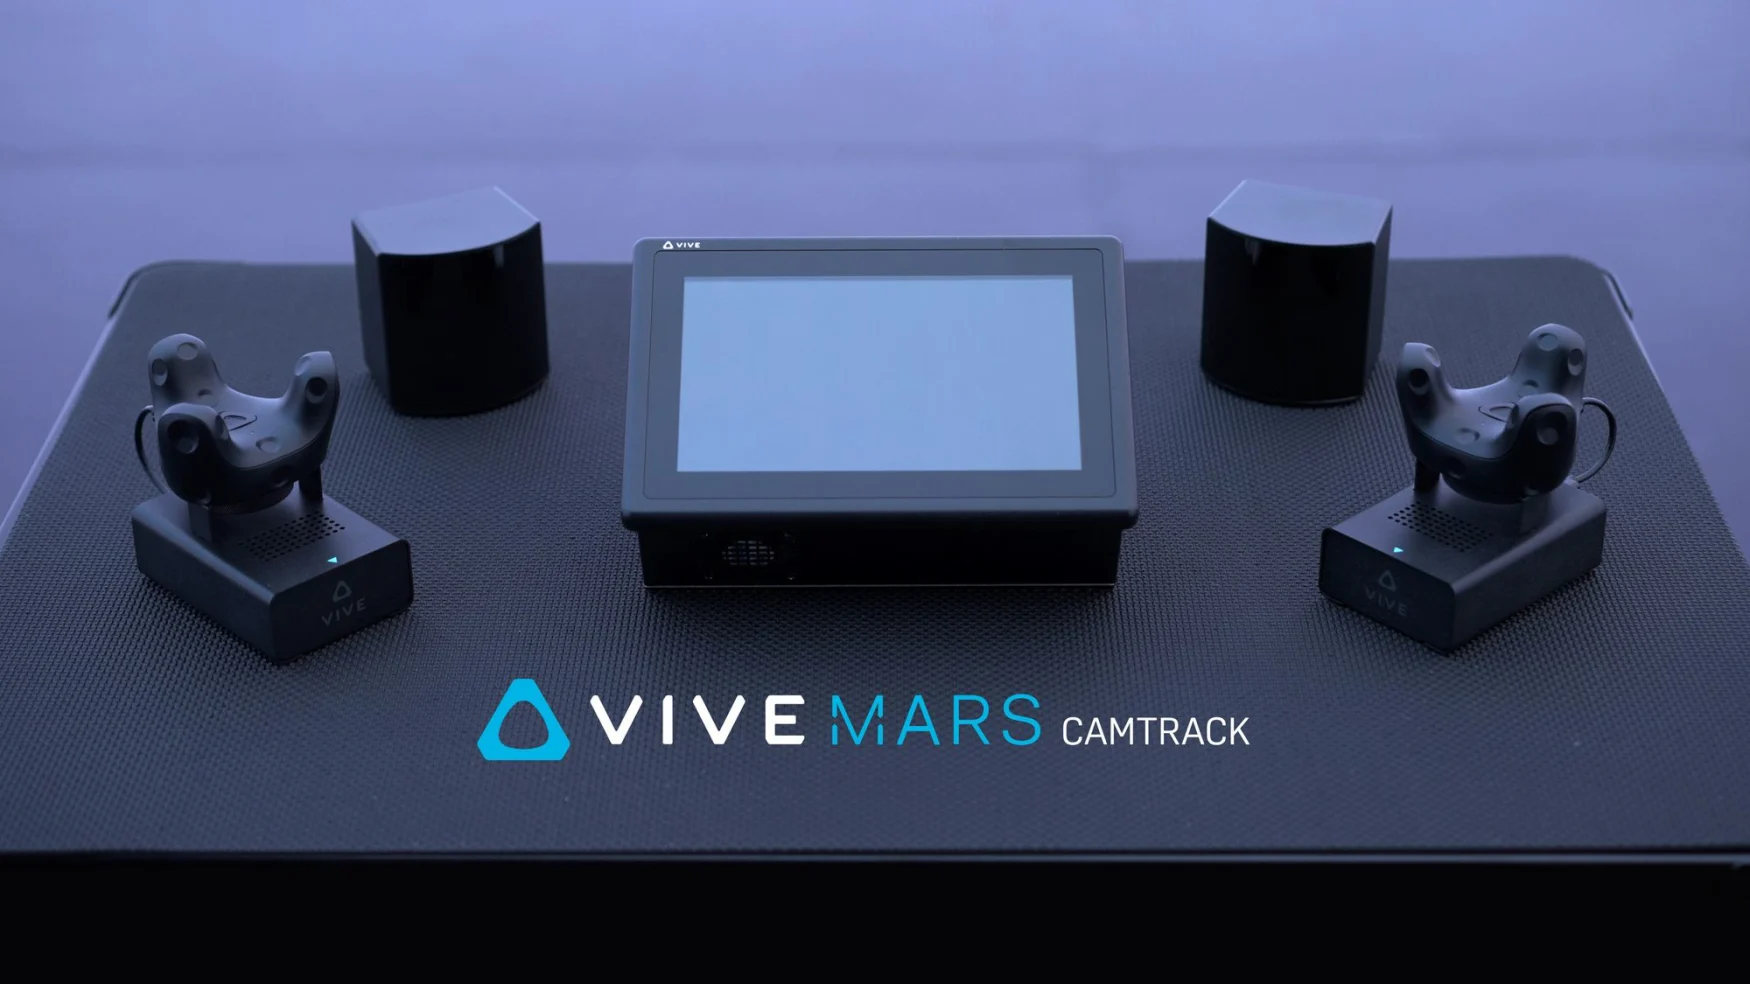 HTC Vive aims to make virtual production affordable with the Mars CamTrack system